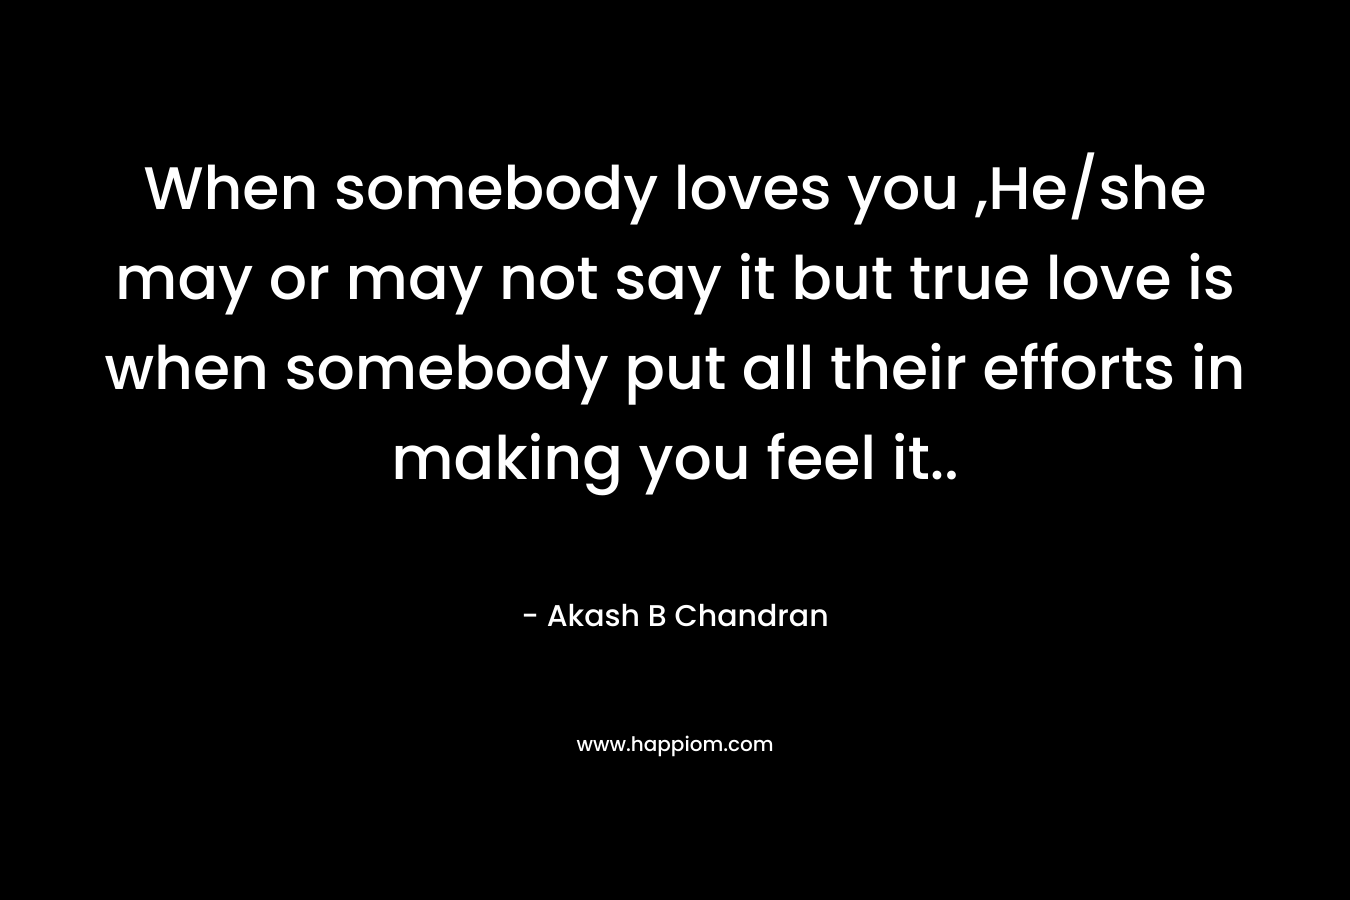 When somebody loves you ,He/she may or may not say it but true love is when somebody put all their efforts in making you feel it..